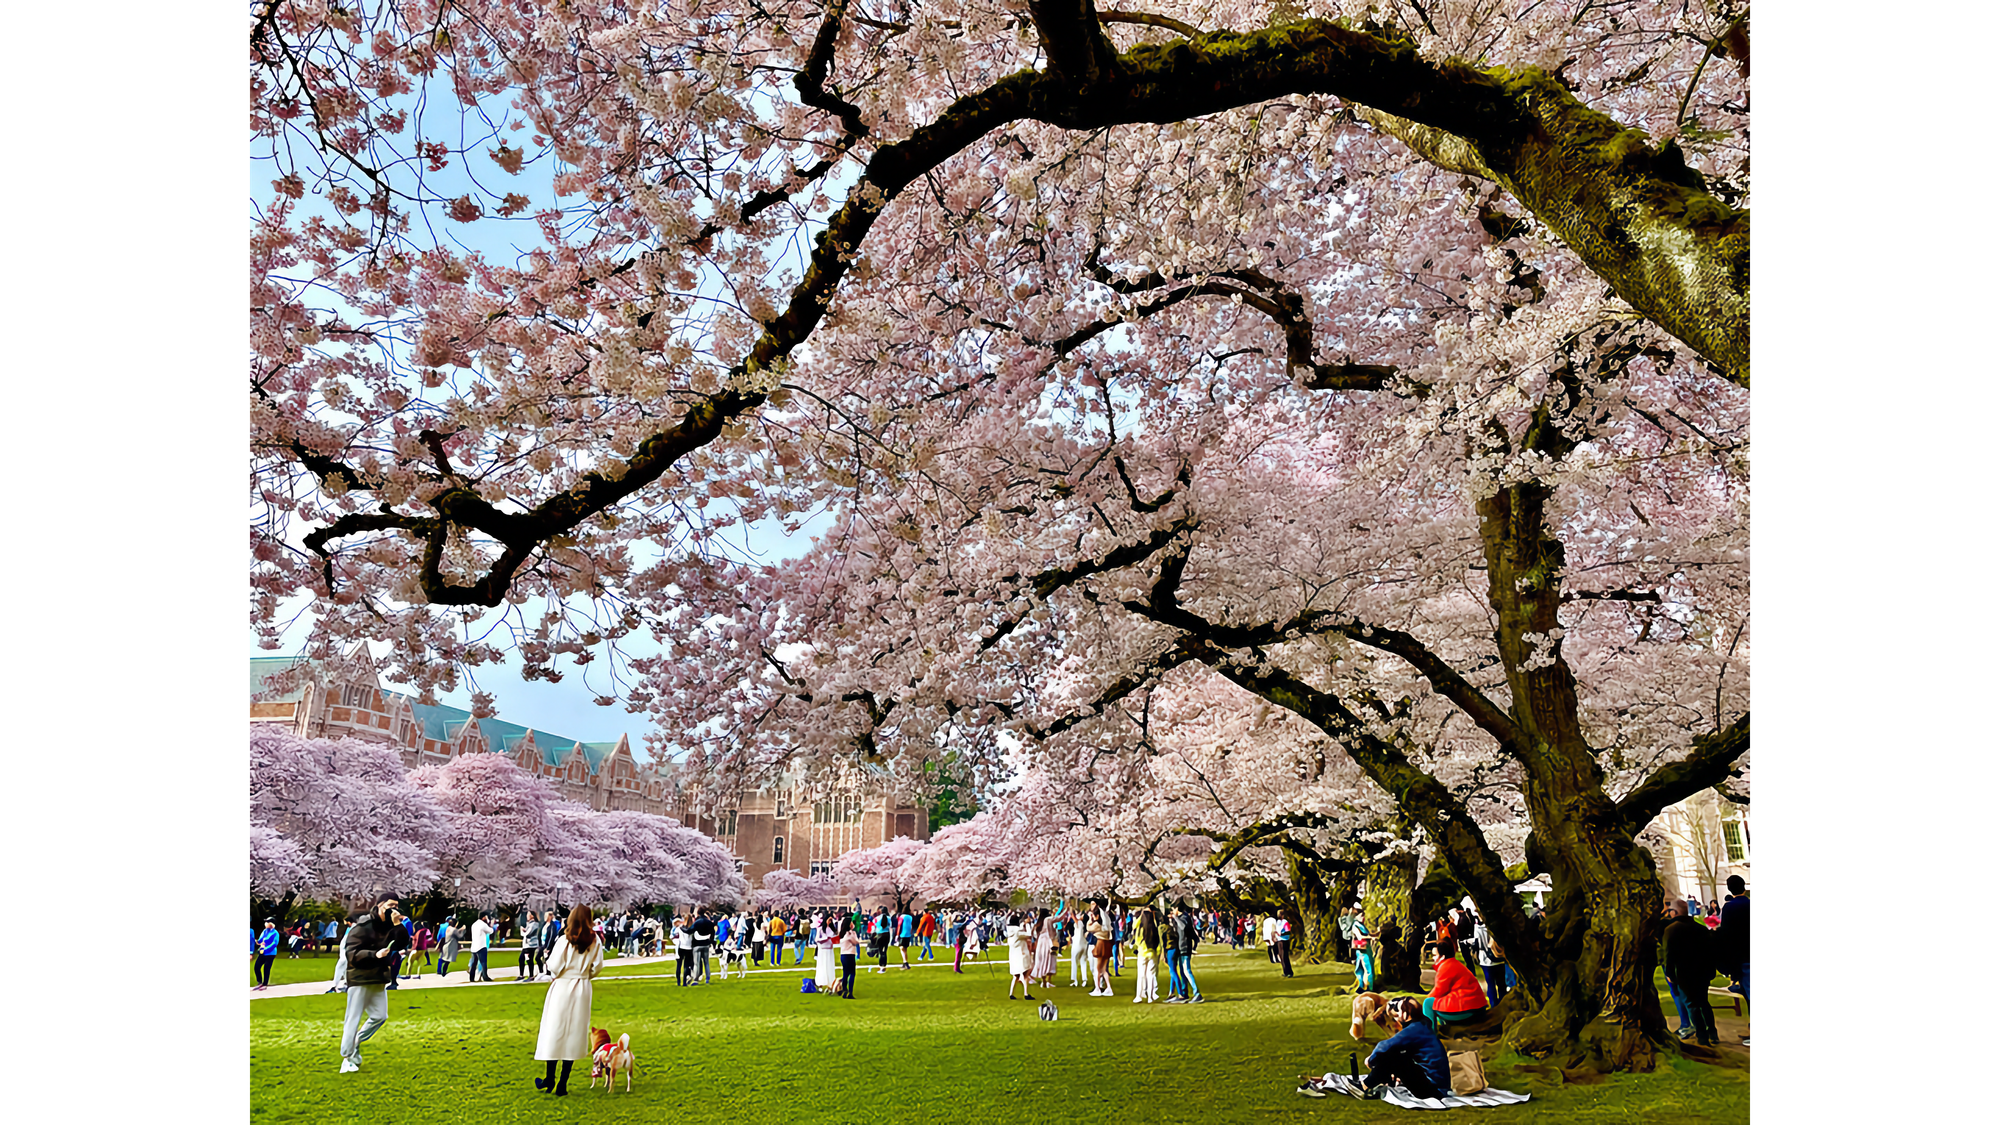 Photo of people under large cherry trees in blossom on green quadrangle.